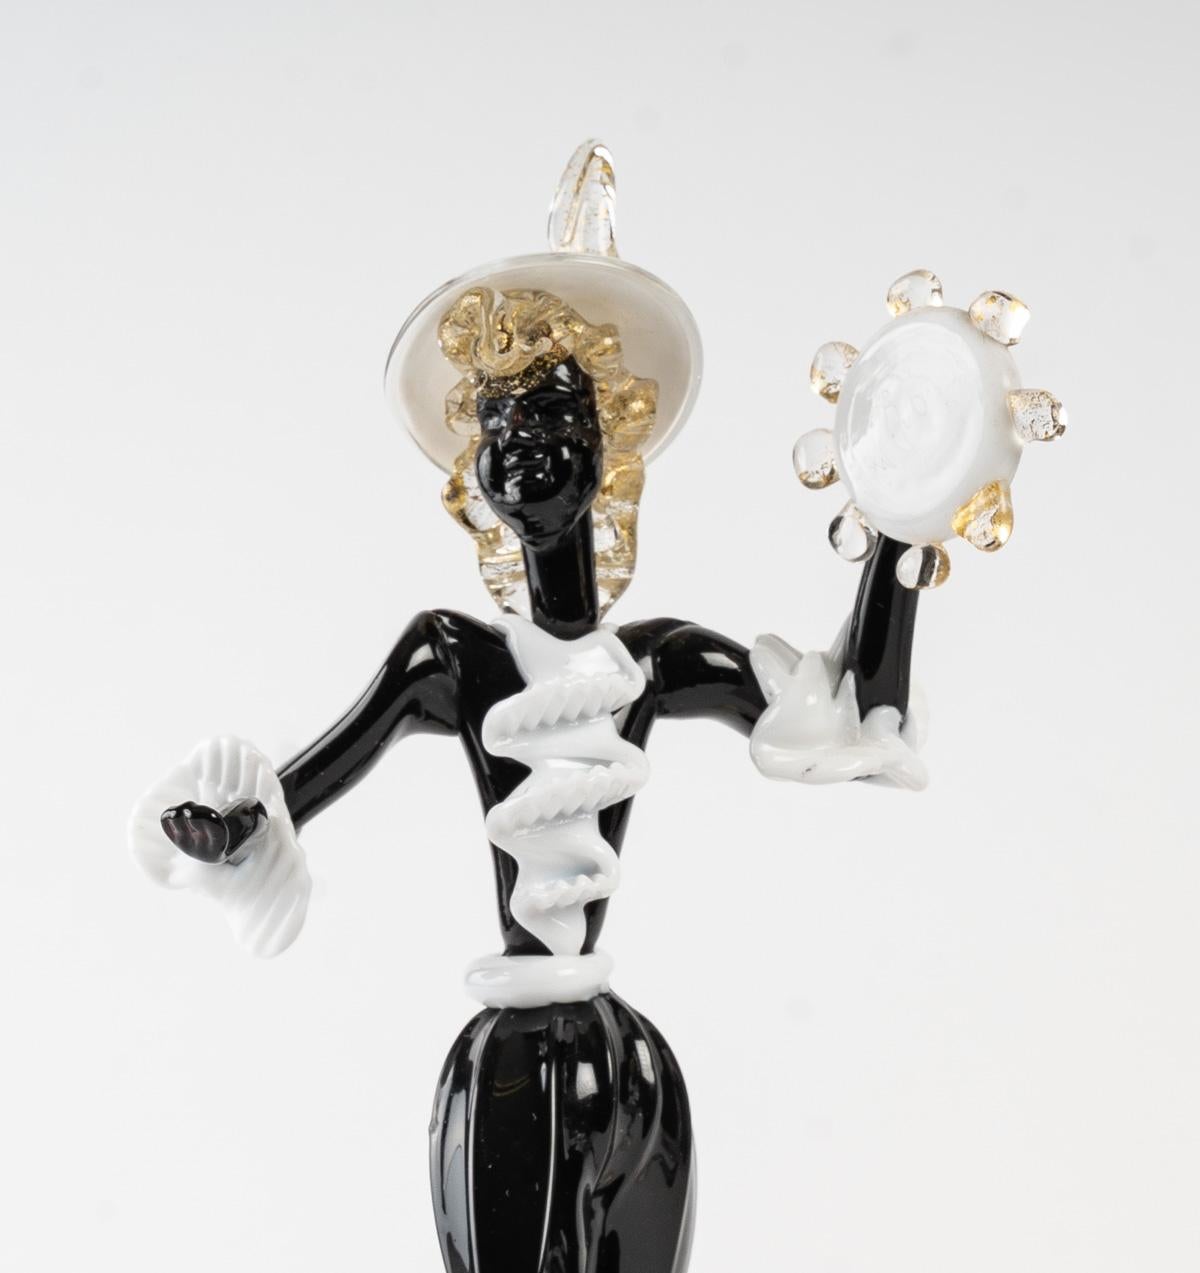 Venetian dancing couple
Murano, 20th century, in perfect condition
Measures: H 23 cm, W 12 cm, base D 9 cm.